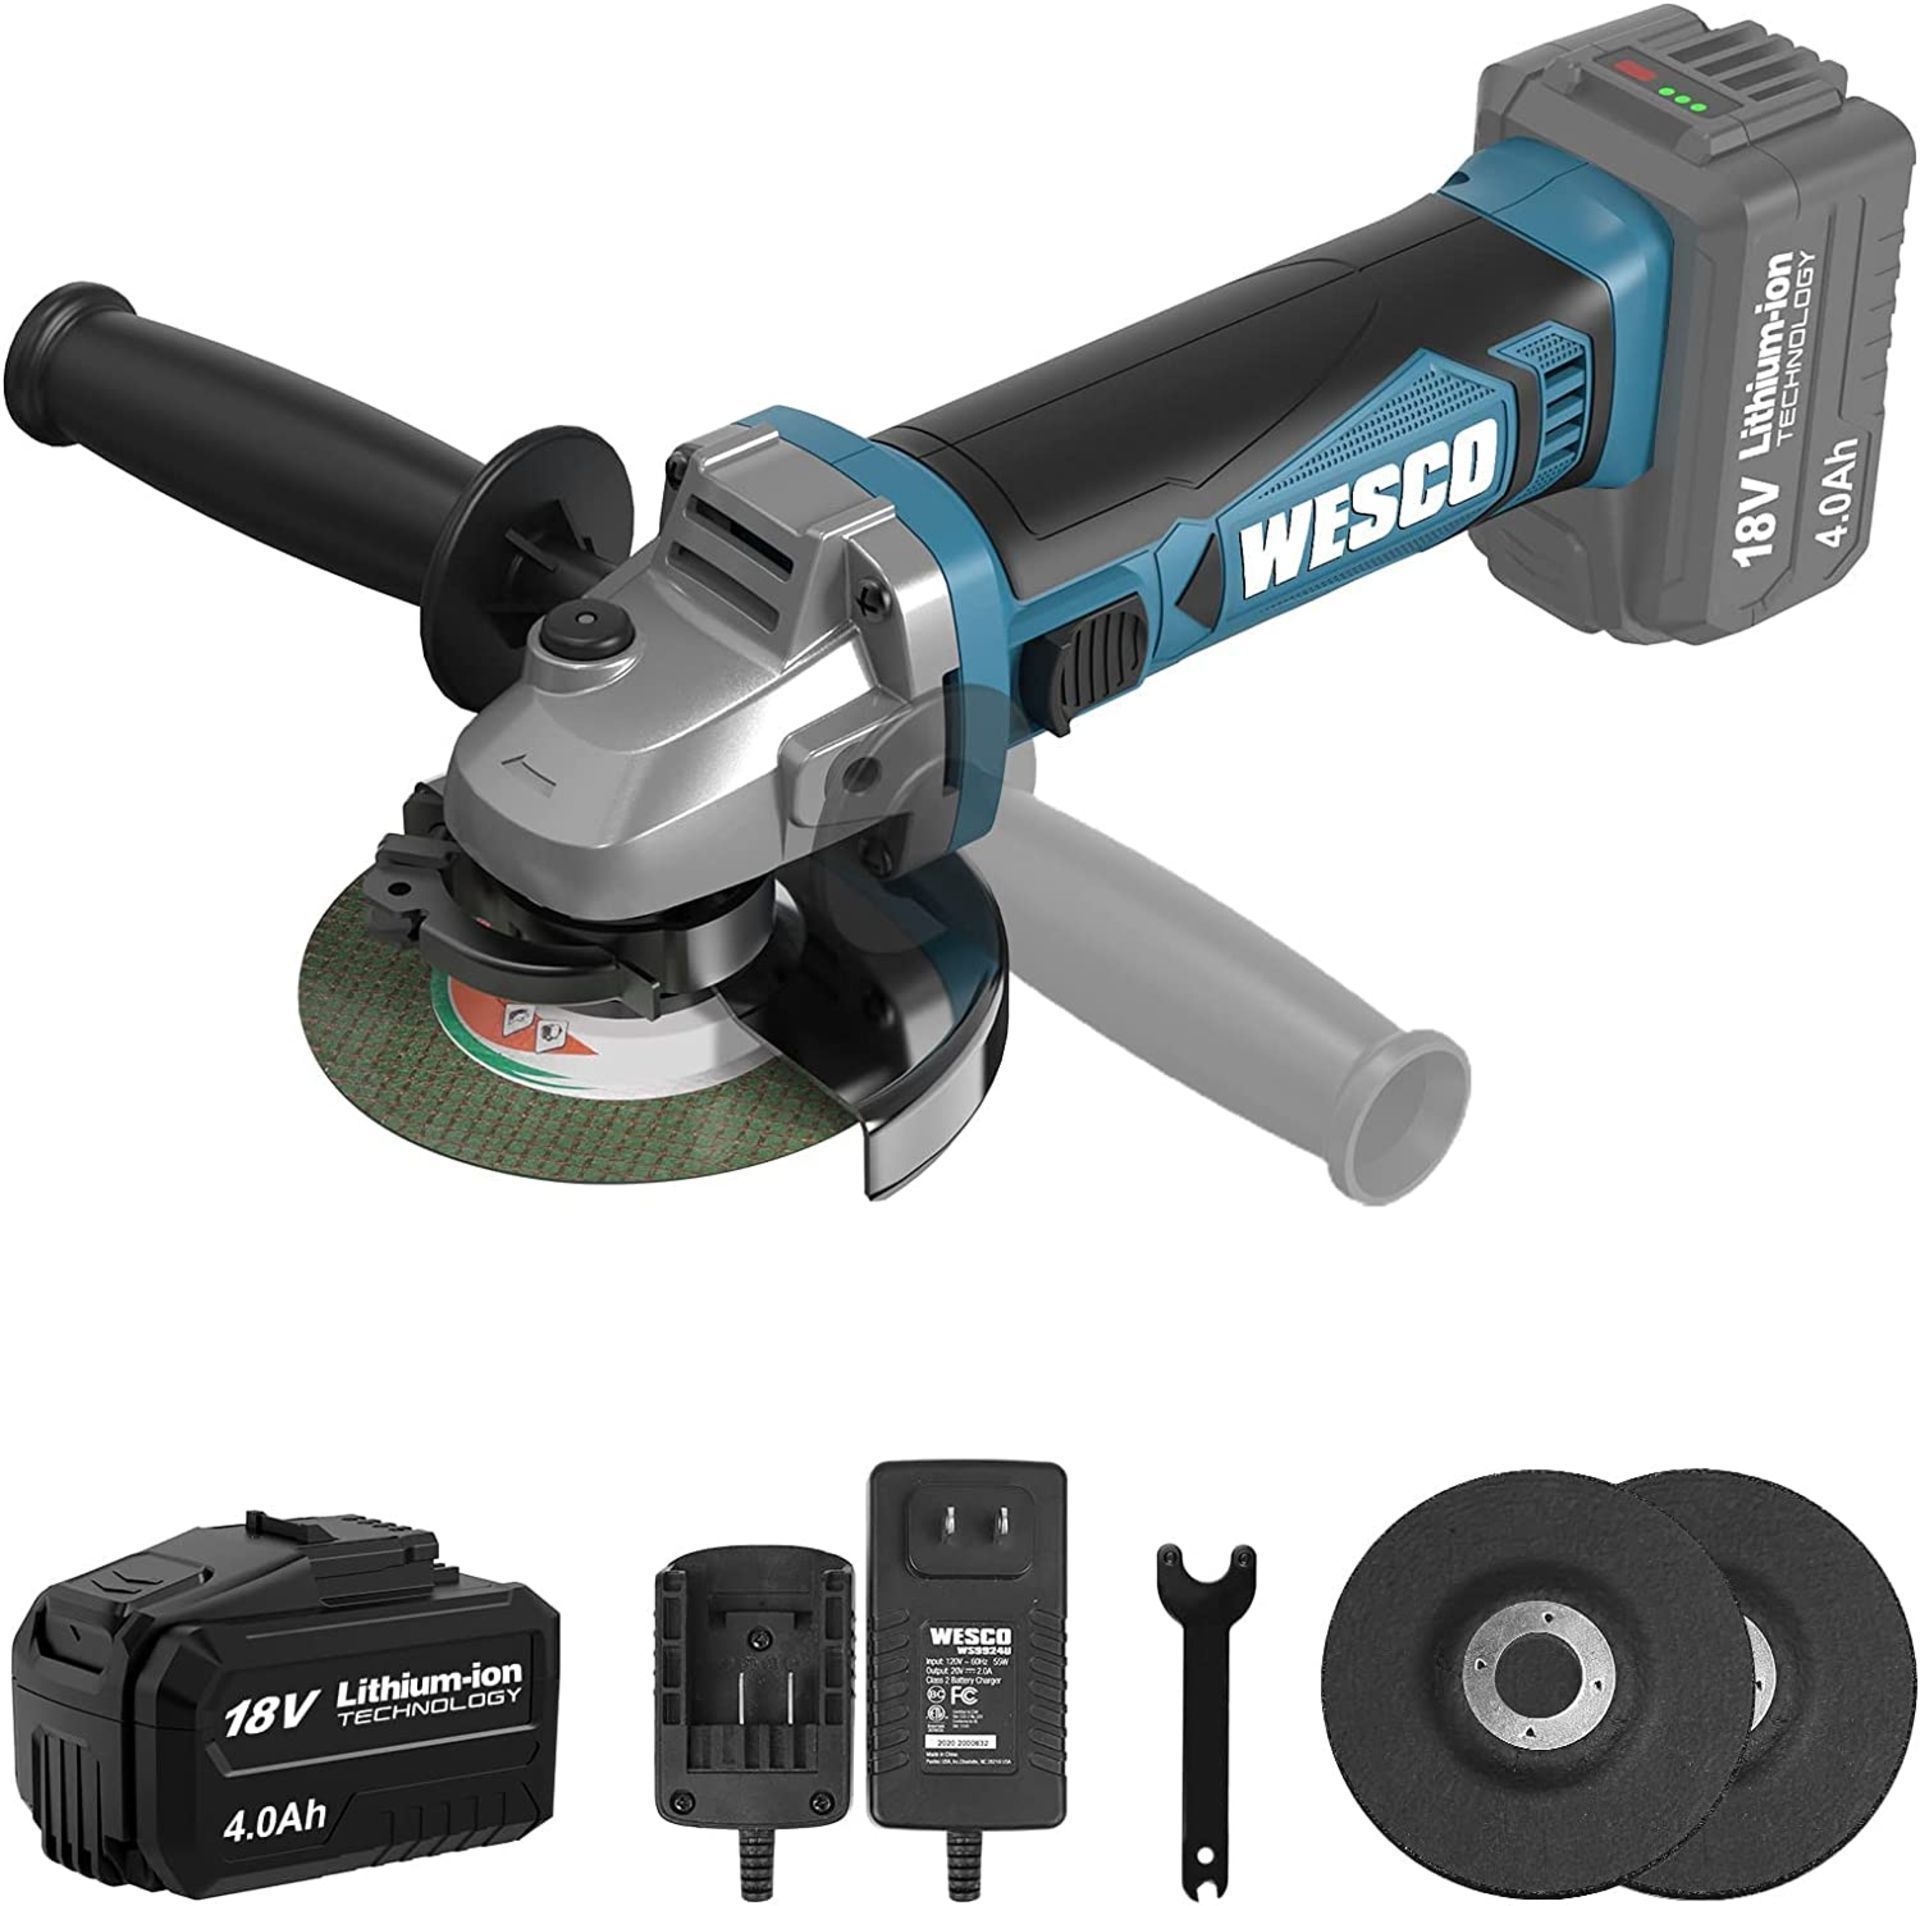 PALLET TO CONTAIN 30 x New Boxed WESCO Cordless Angle Grinder, 18V 4.0Ah Cordless Grinder, Angle